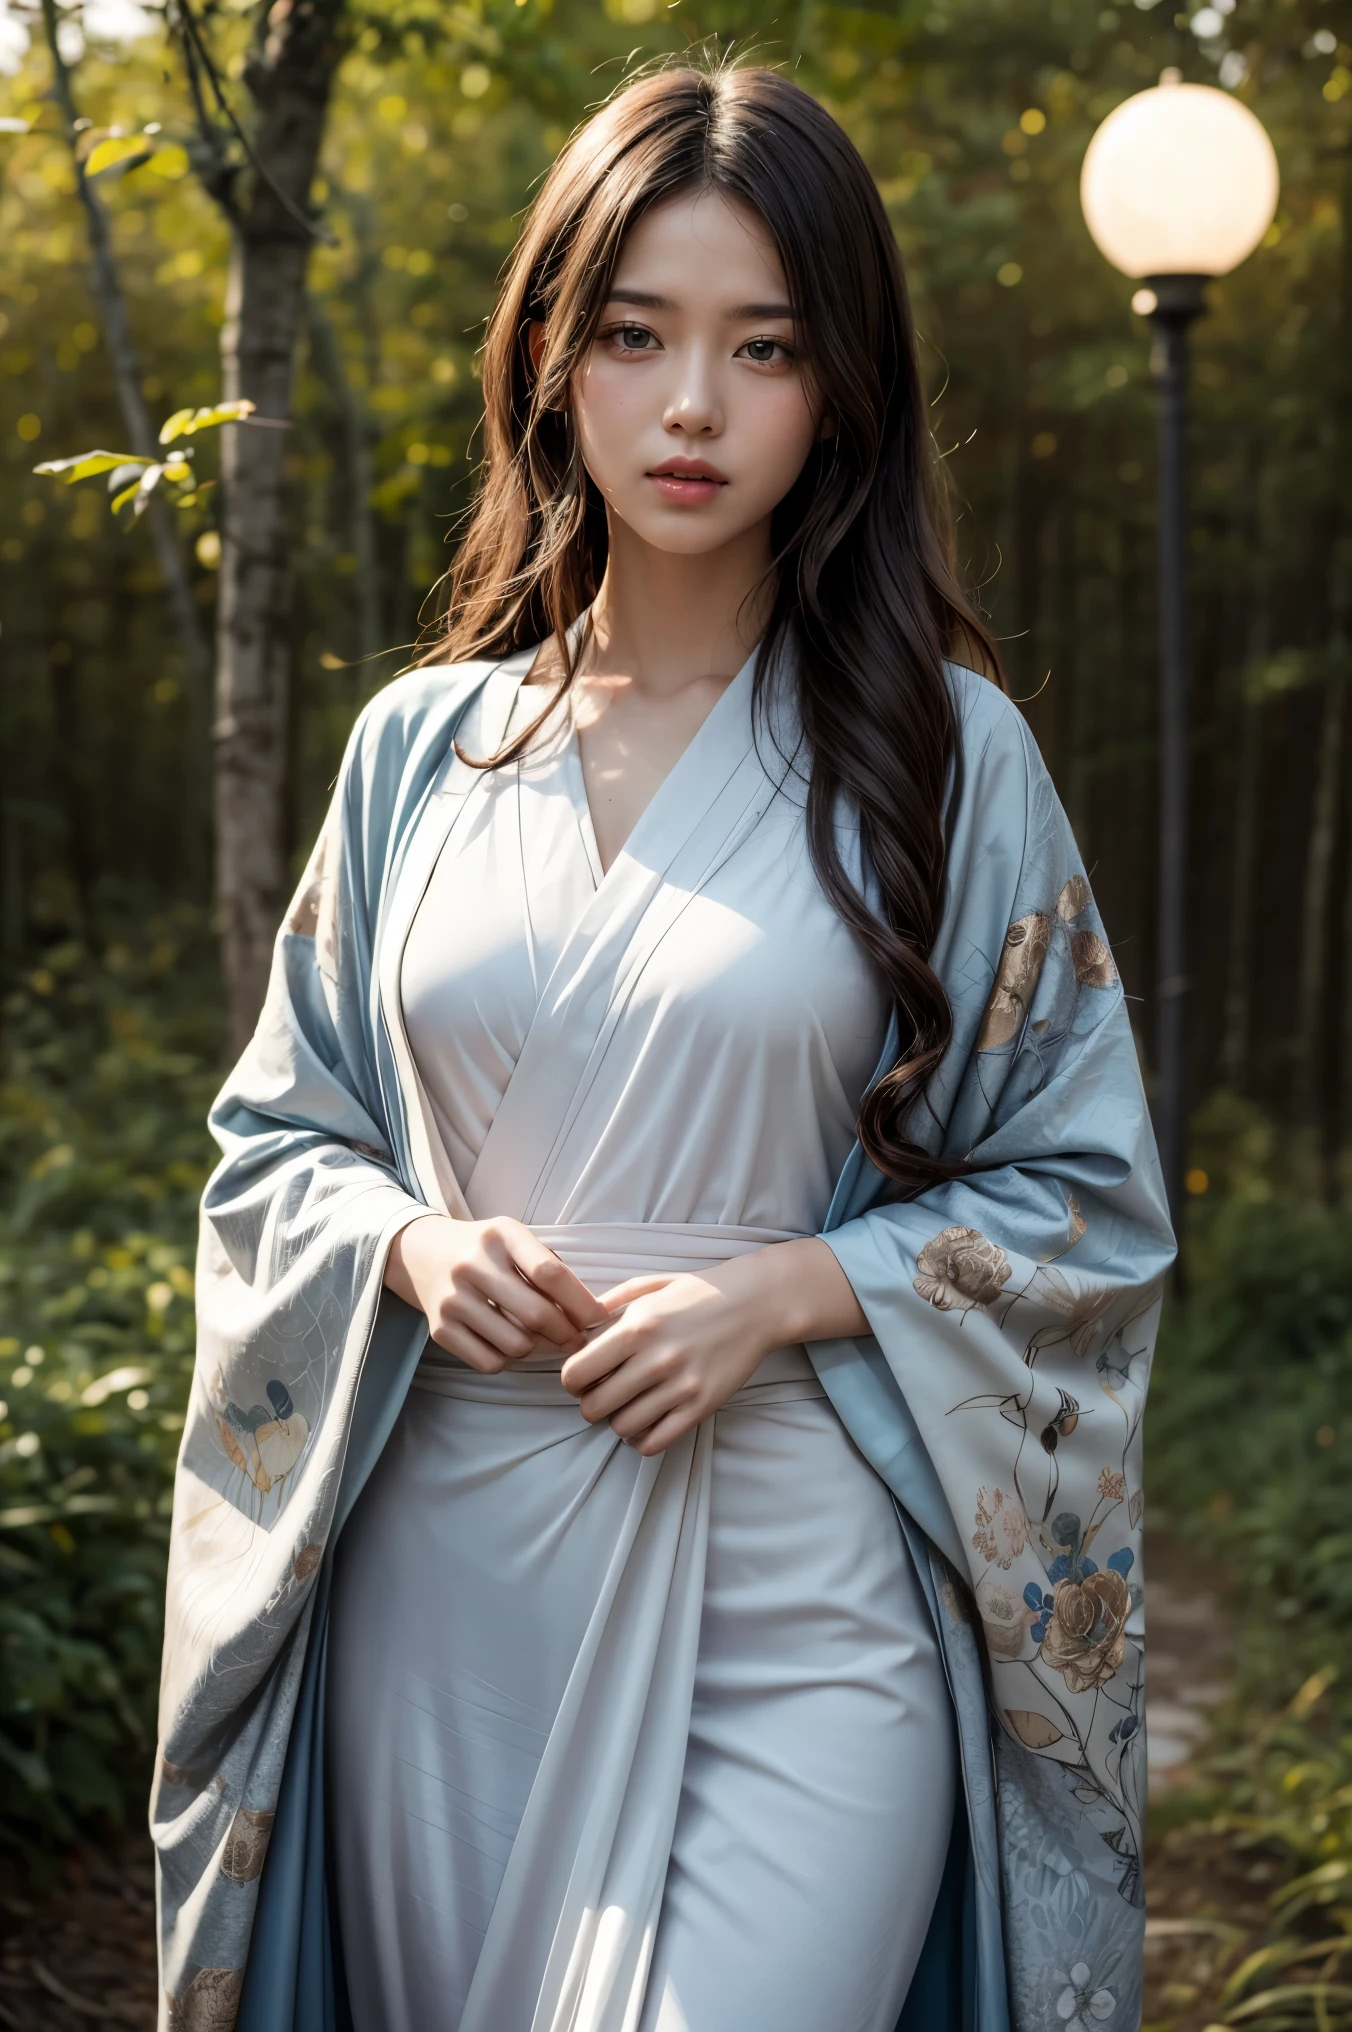 A seductive and mysterious girl with long dark hair, dressed in traditional Japanese clothing, standing in a moonlit forest. The illustration is inspired by the character Ragawa Kiriko from the manga series "Akatsuki no Yona". The artwork is highly detailed and realistic, with intricate patterns on her kimono and soft lighting. Created by artist WLOP using digital painting techniques. (Concept art, 4k resolution)